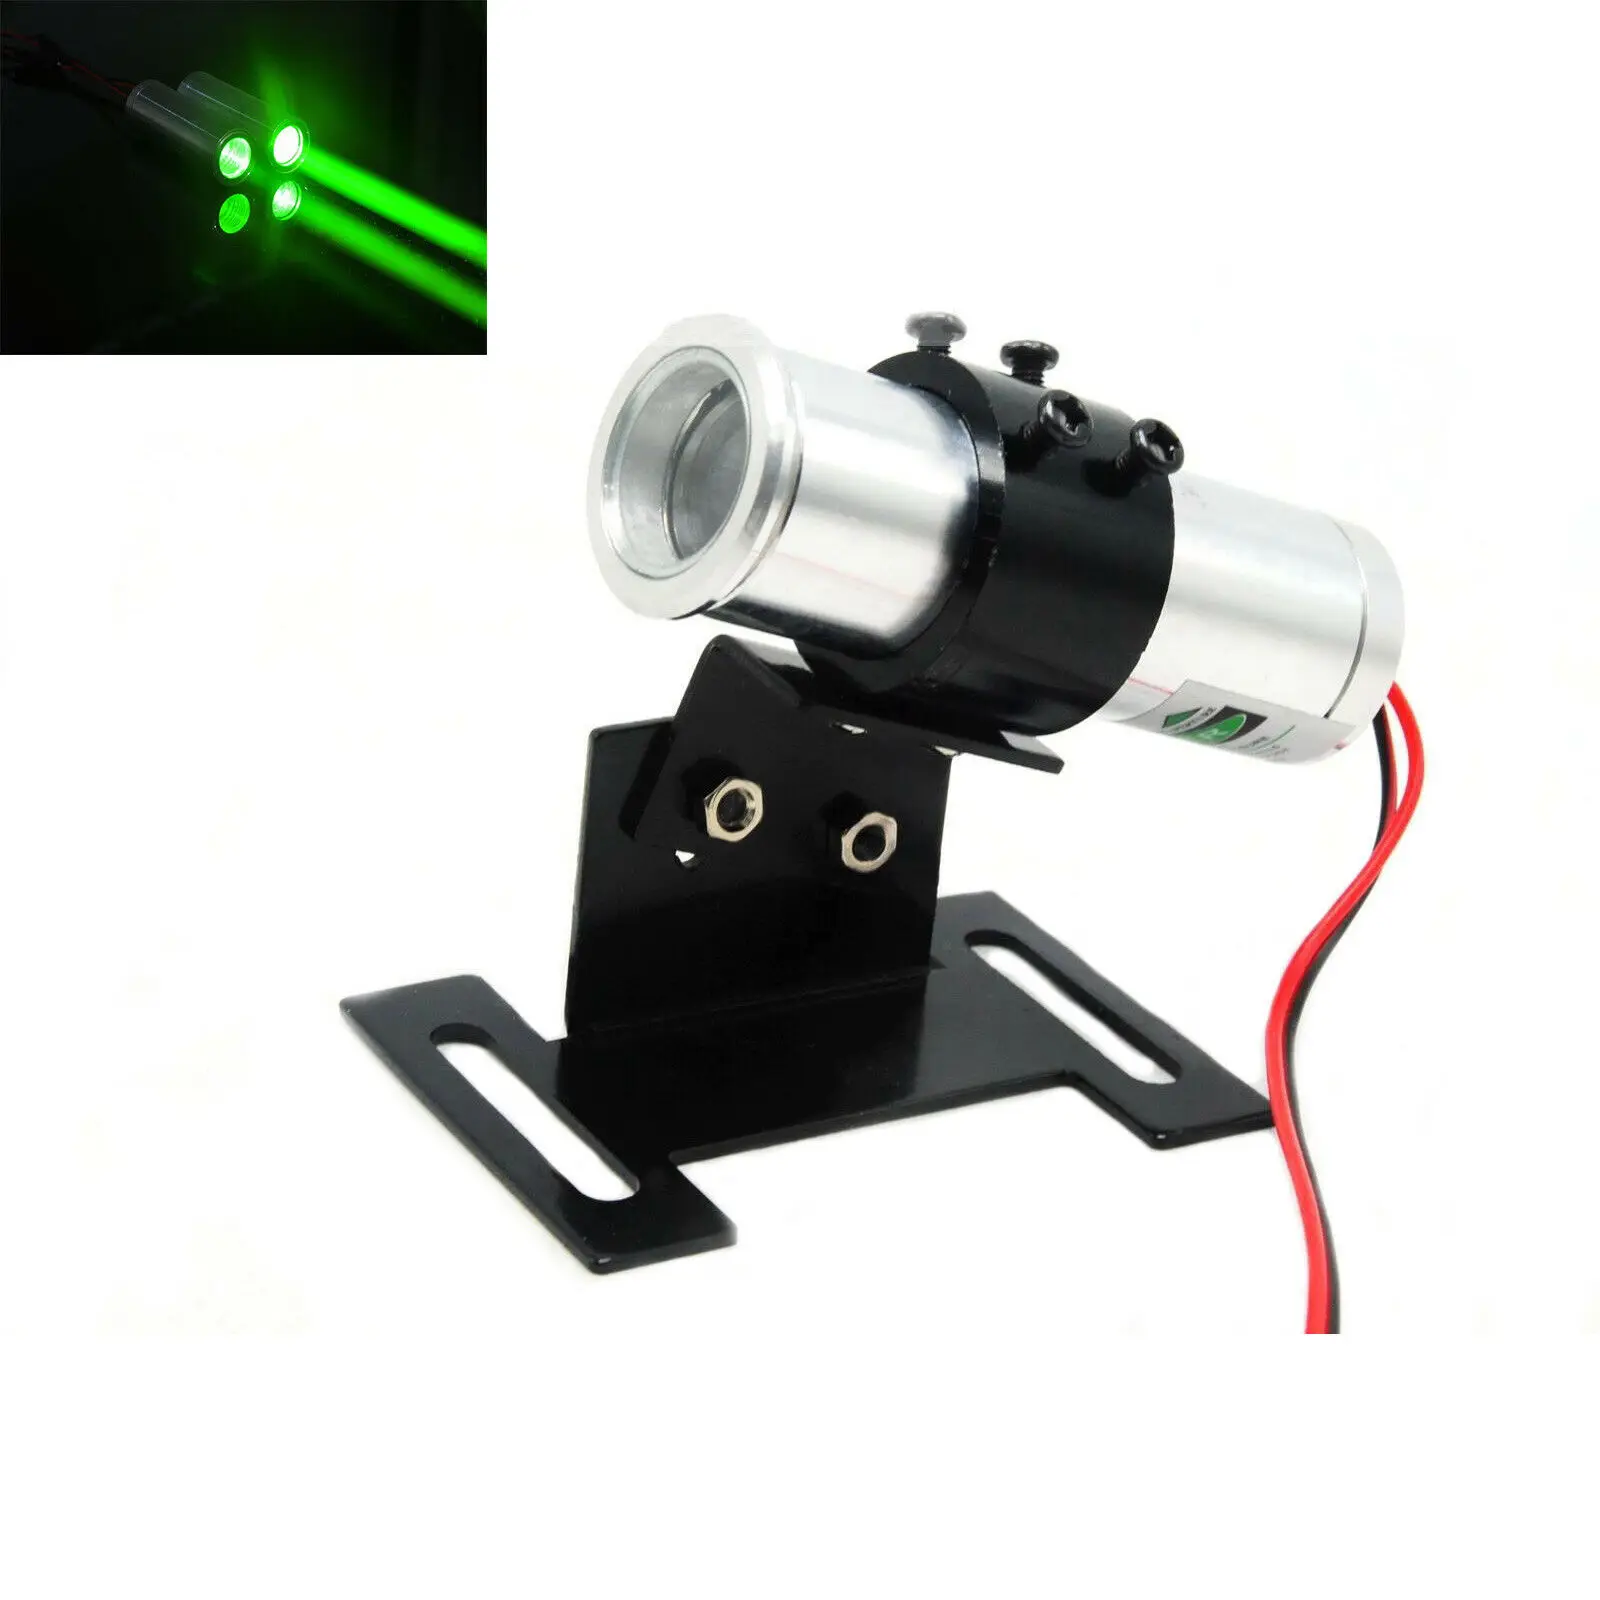 

532nm 30mW 3V Green Laser Line Diode Module Brass Host 12mm w/ Driver Reticle